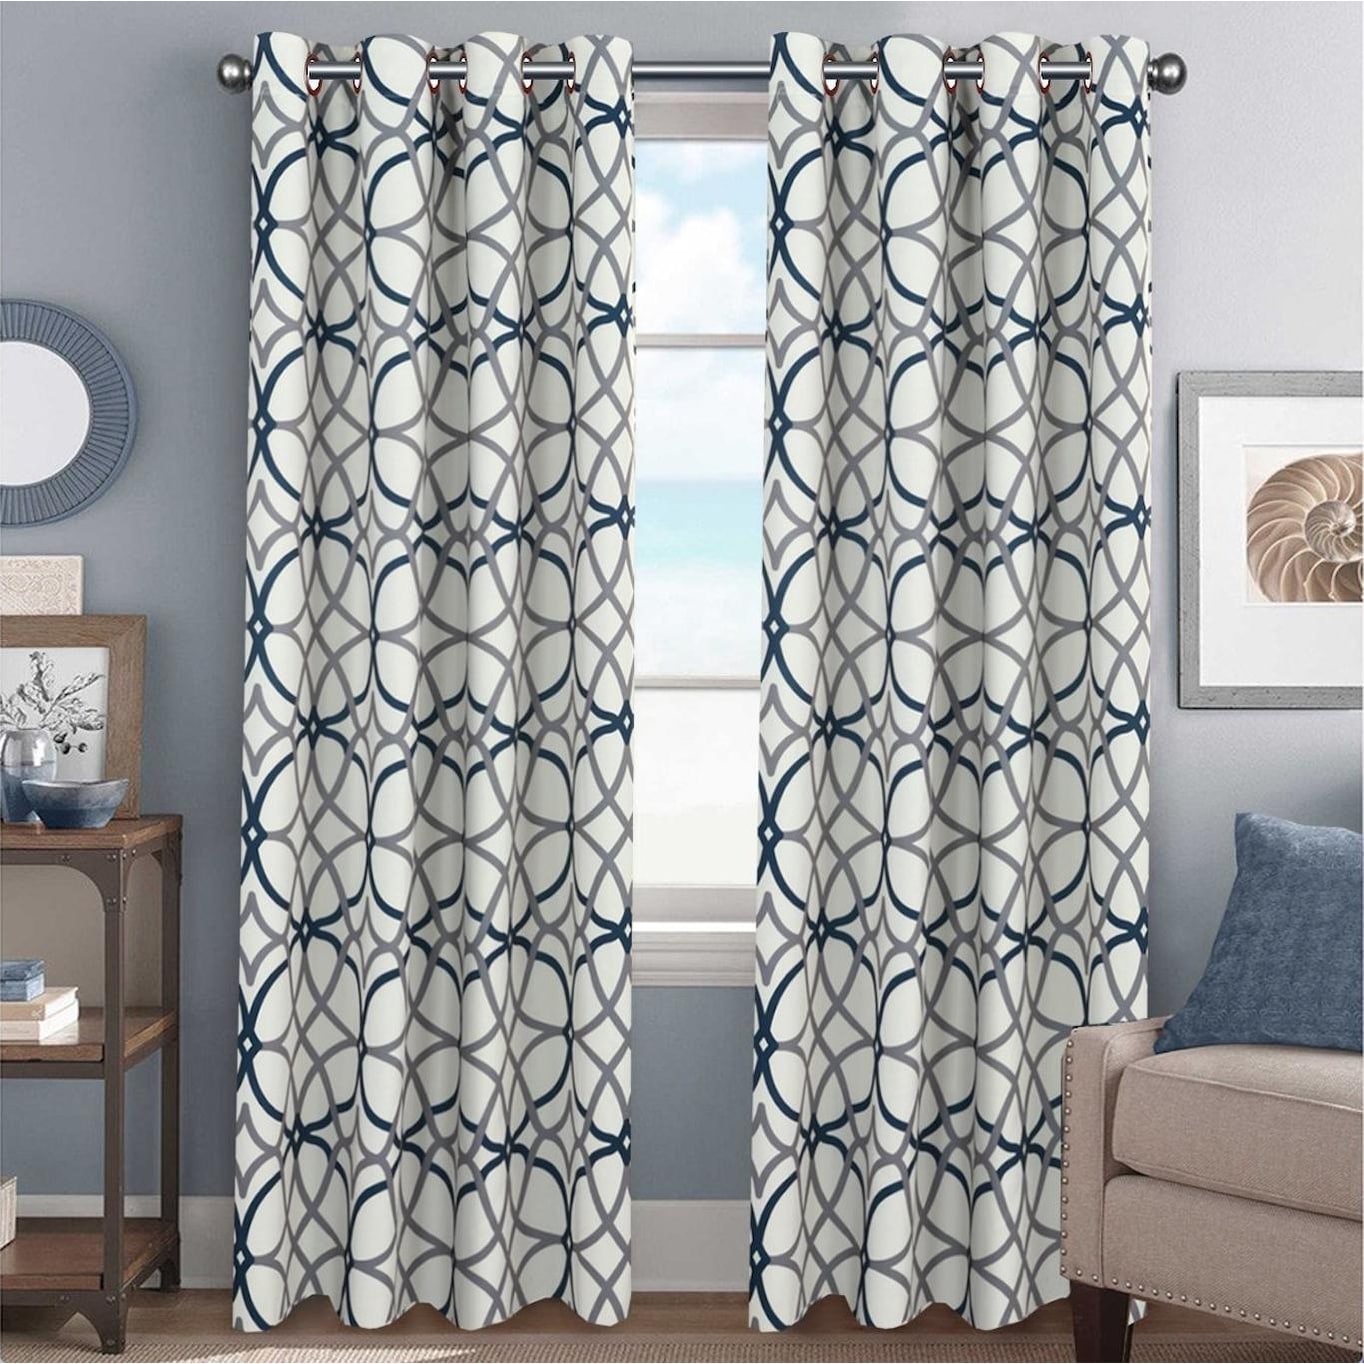 at Home 2-Pack White & Linen Metallic Embroidered Geo Grommet Curtain Panels, 84